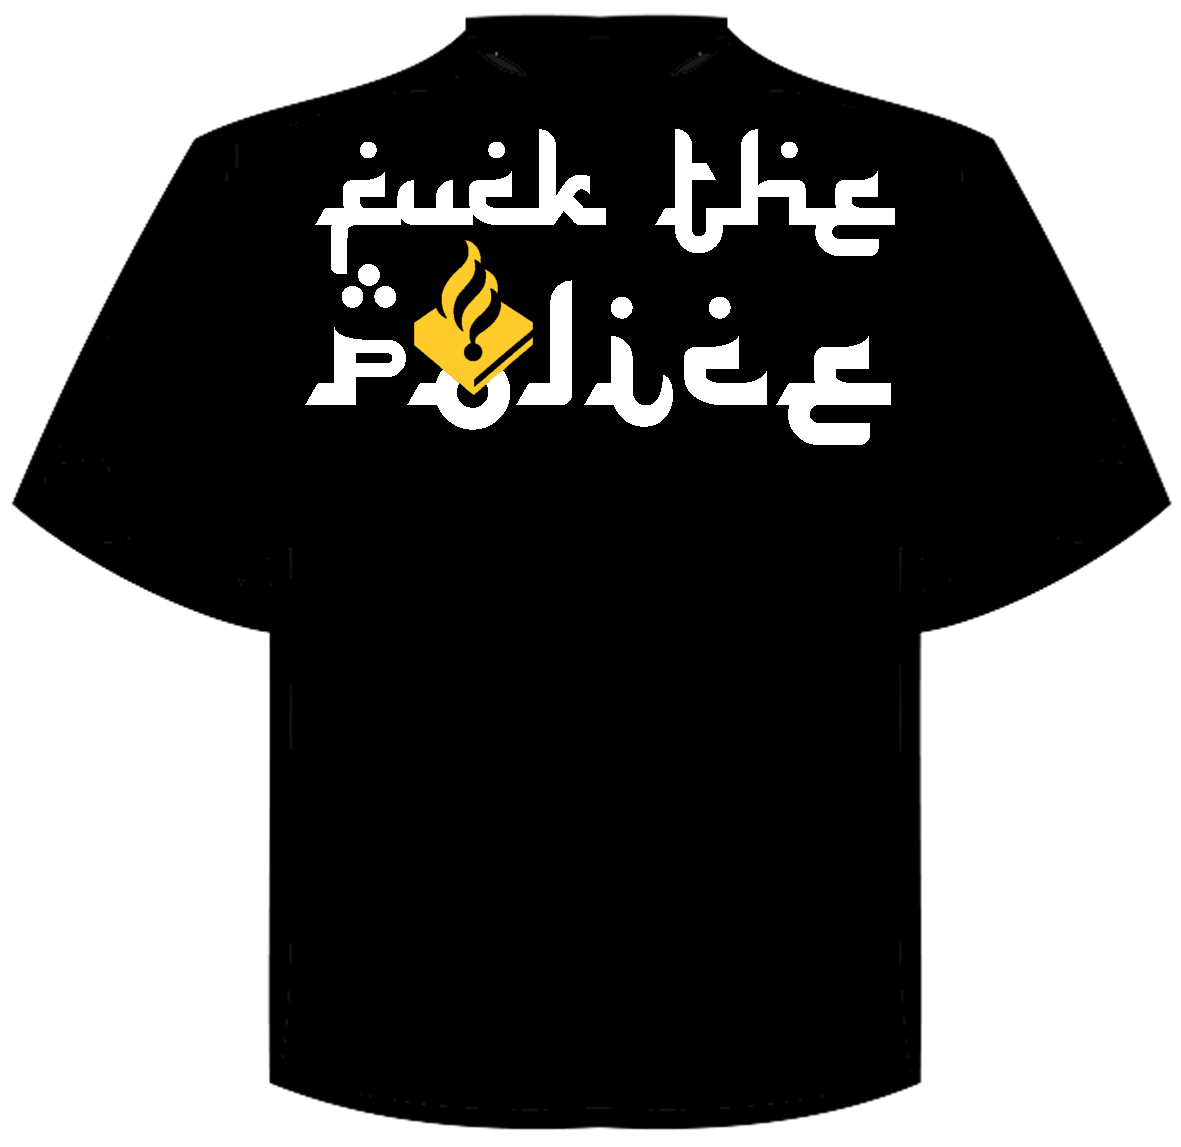 T-Shirt "fuck the police"